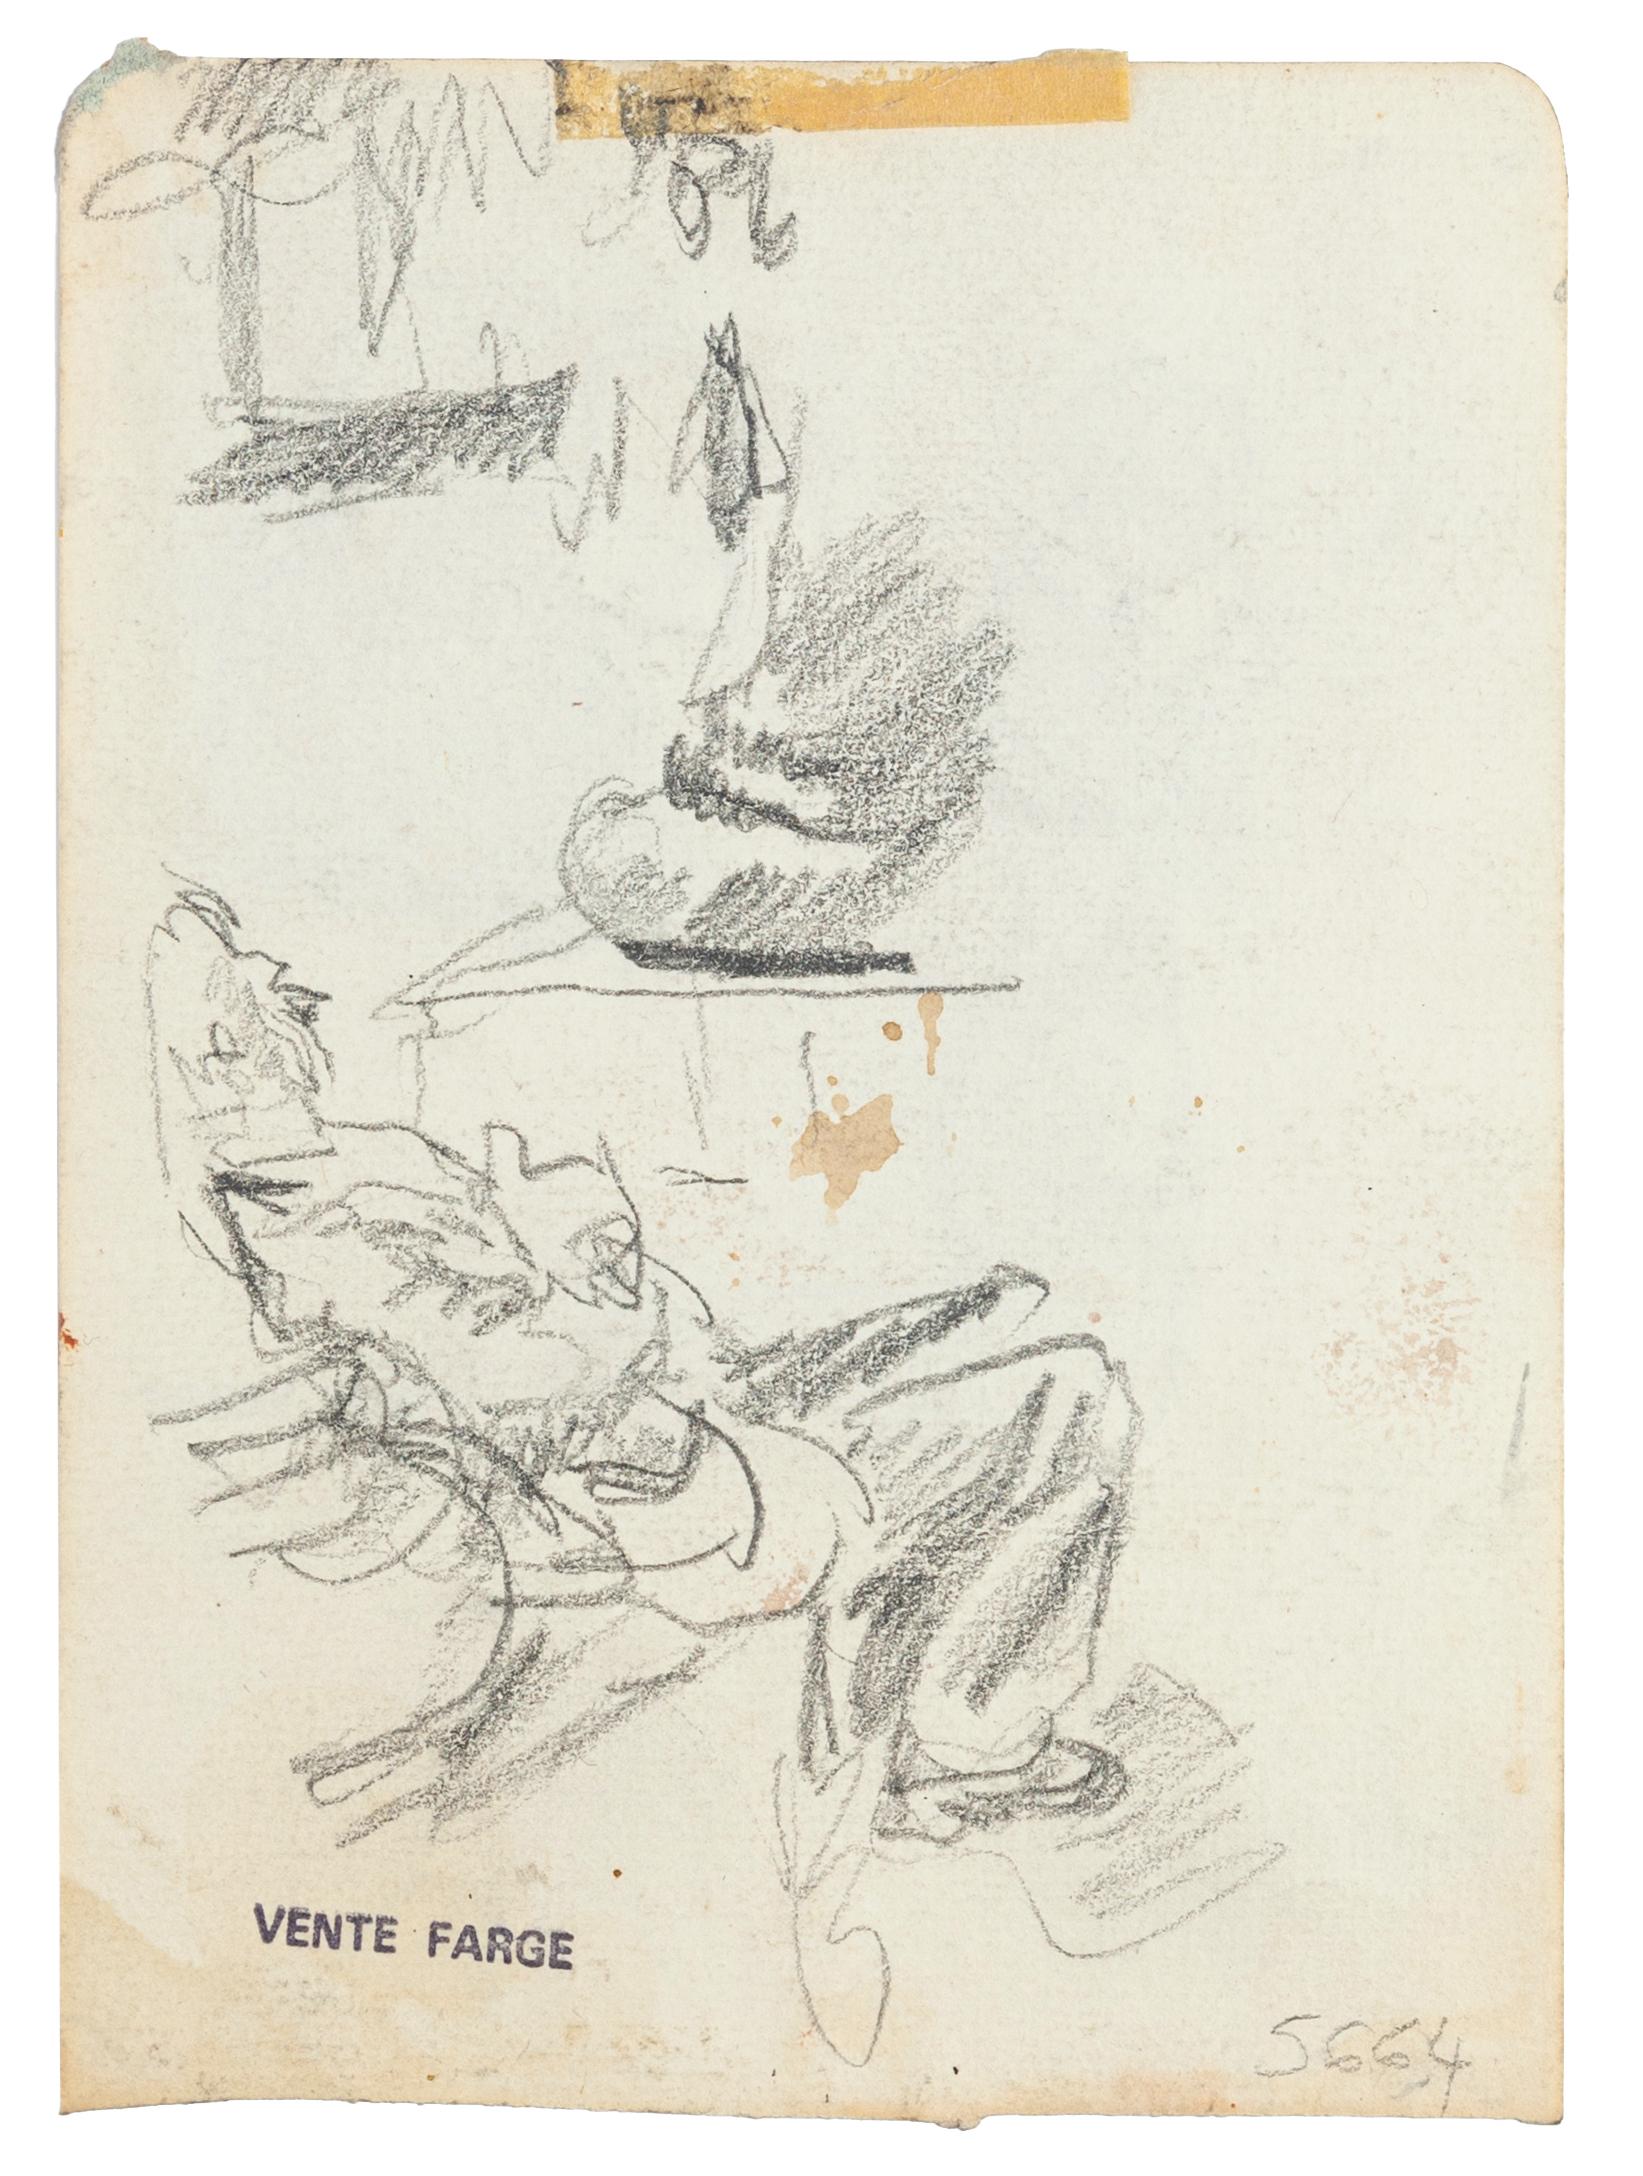 Study of Figures - Original Pencil and Watercolor on Paper - Mid 20th Century - Art by Unknown